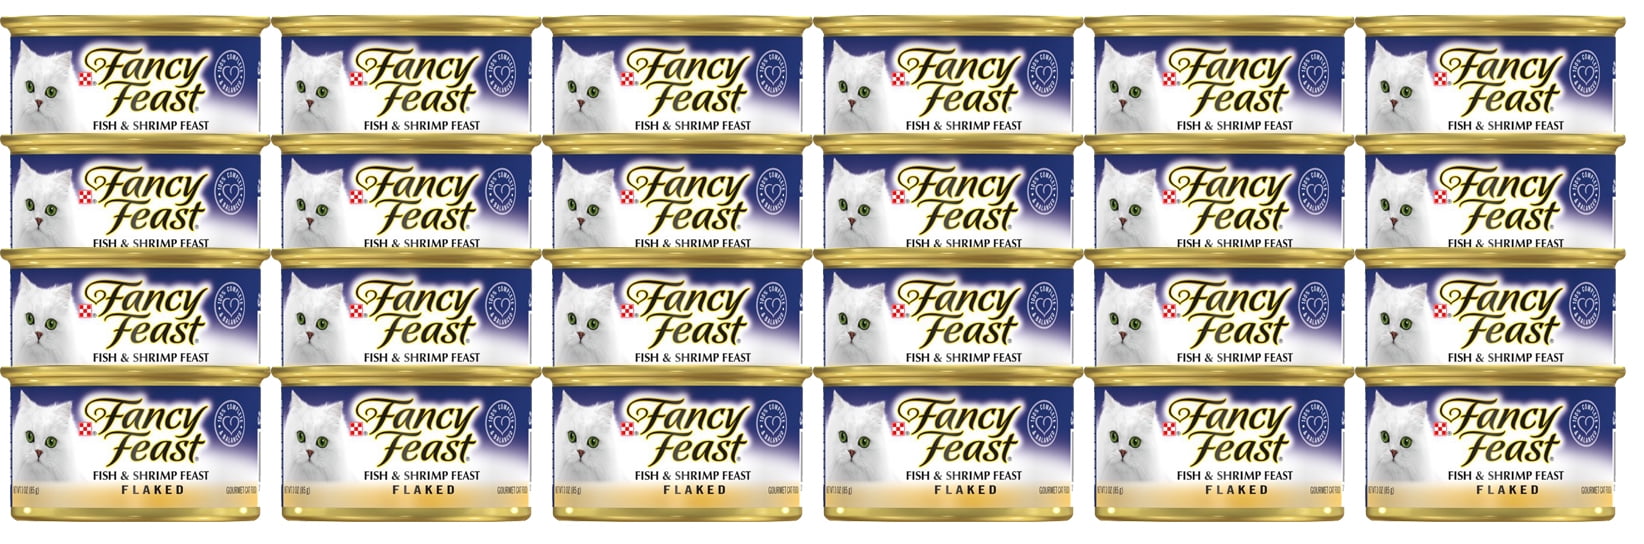 fancy feast flaked variety pack